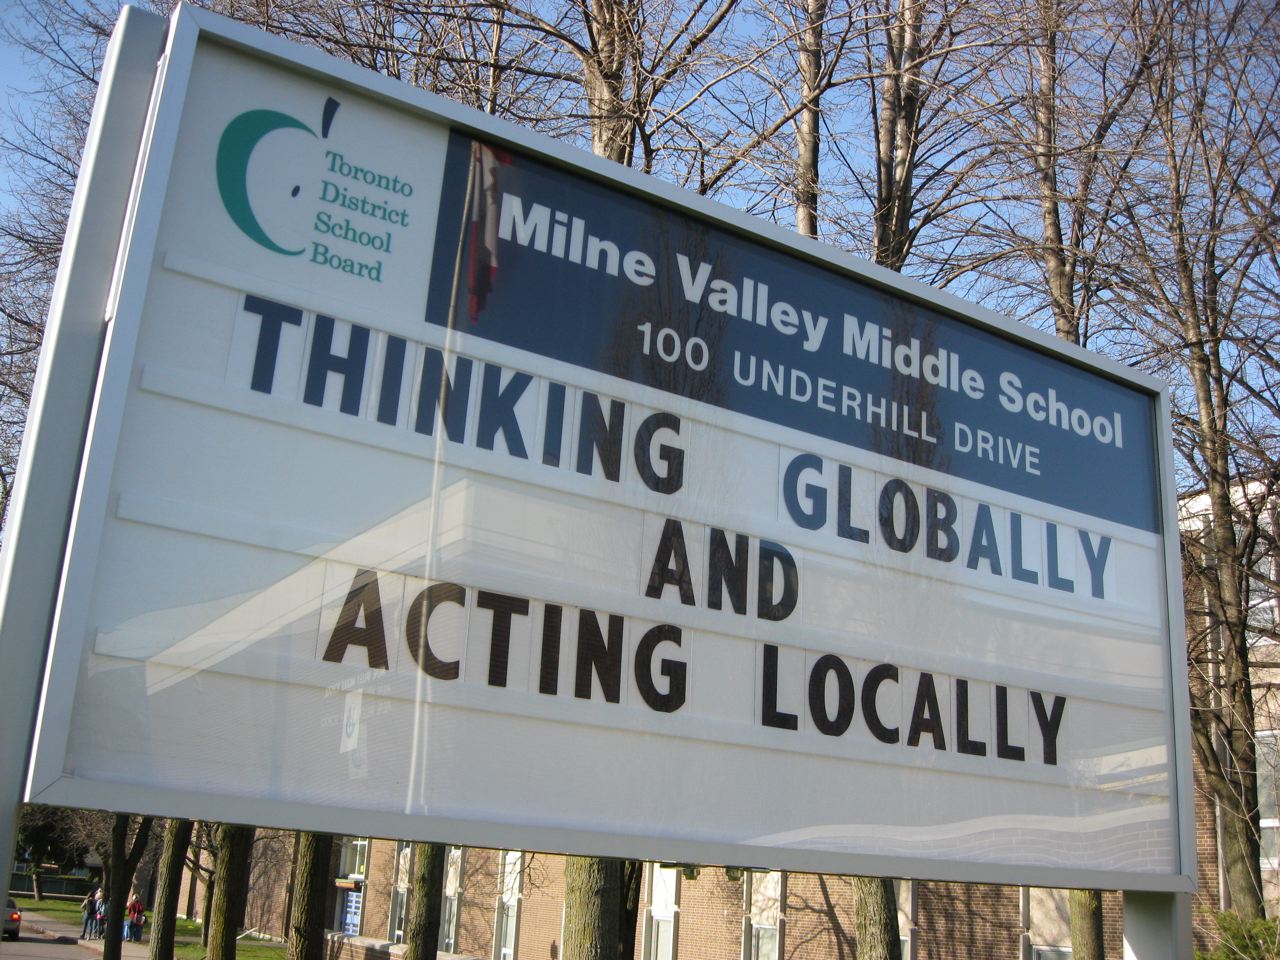 Thinking globally and acting locally